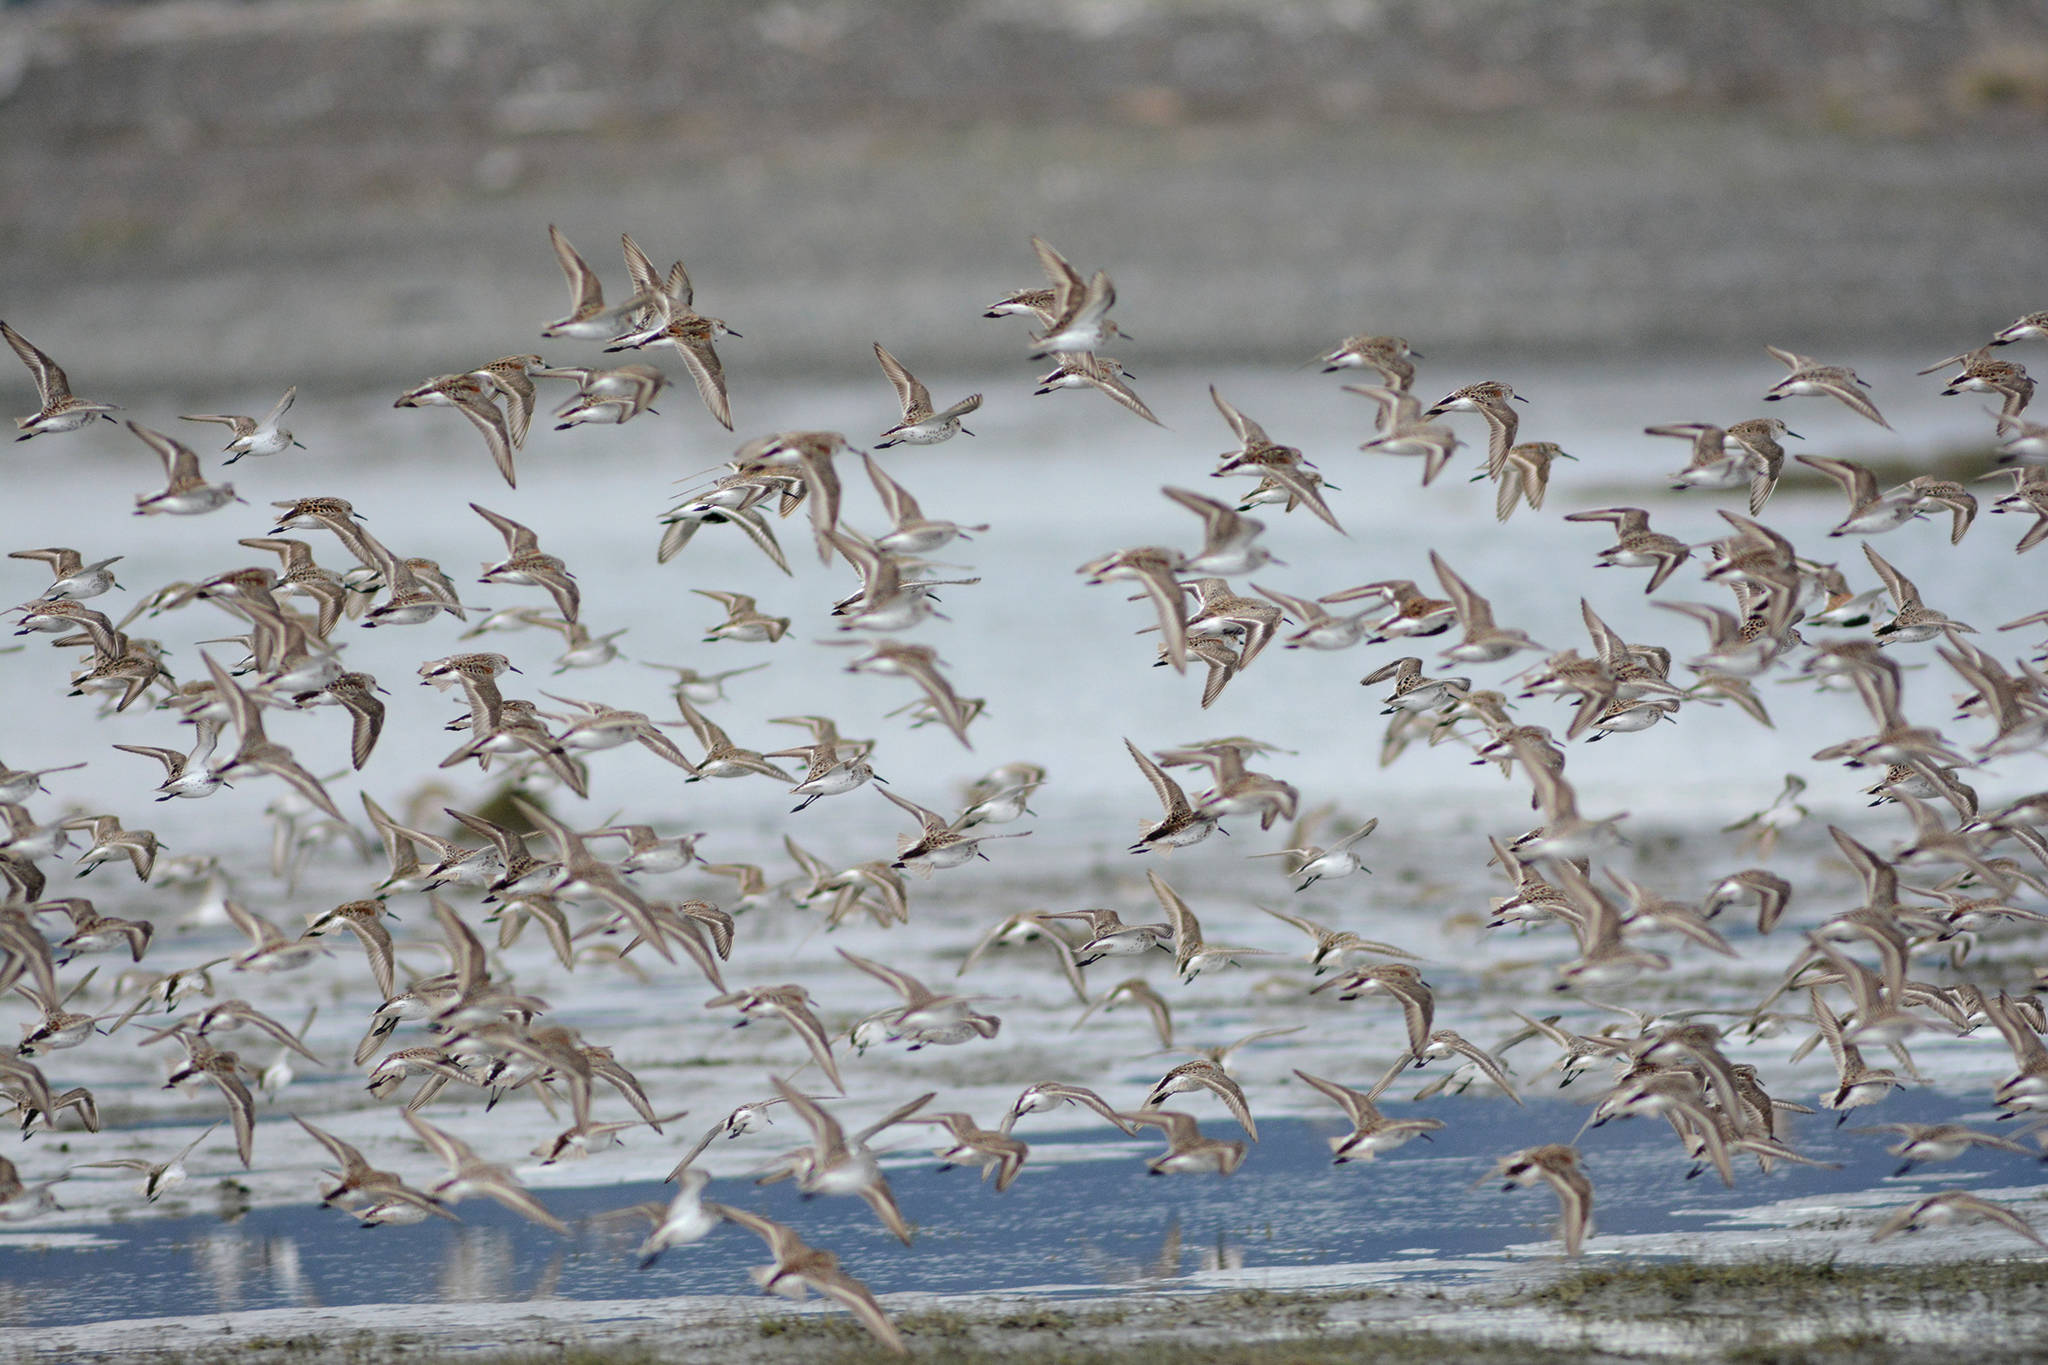 Shorebirds fly over Louie’s Lagoon on Saturday, May 9, 2020, on the Homer Spit in Homer, Alaska. (Photo by Michael Armstrong/Homer News)